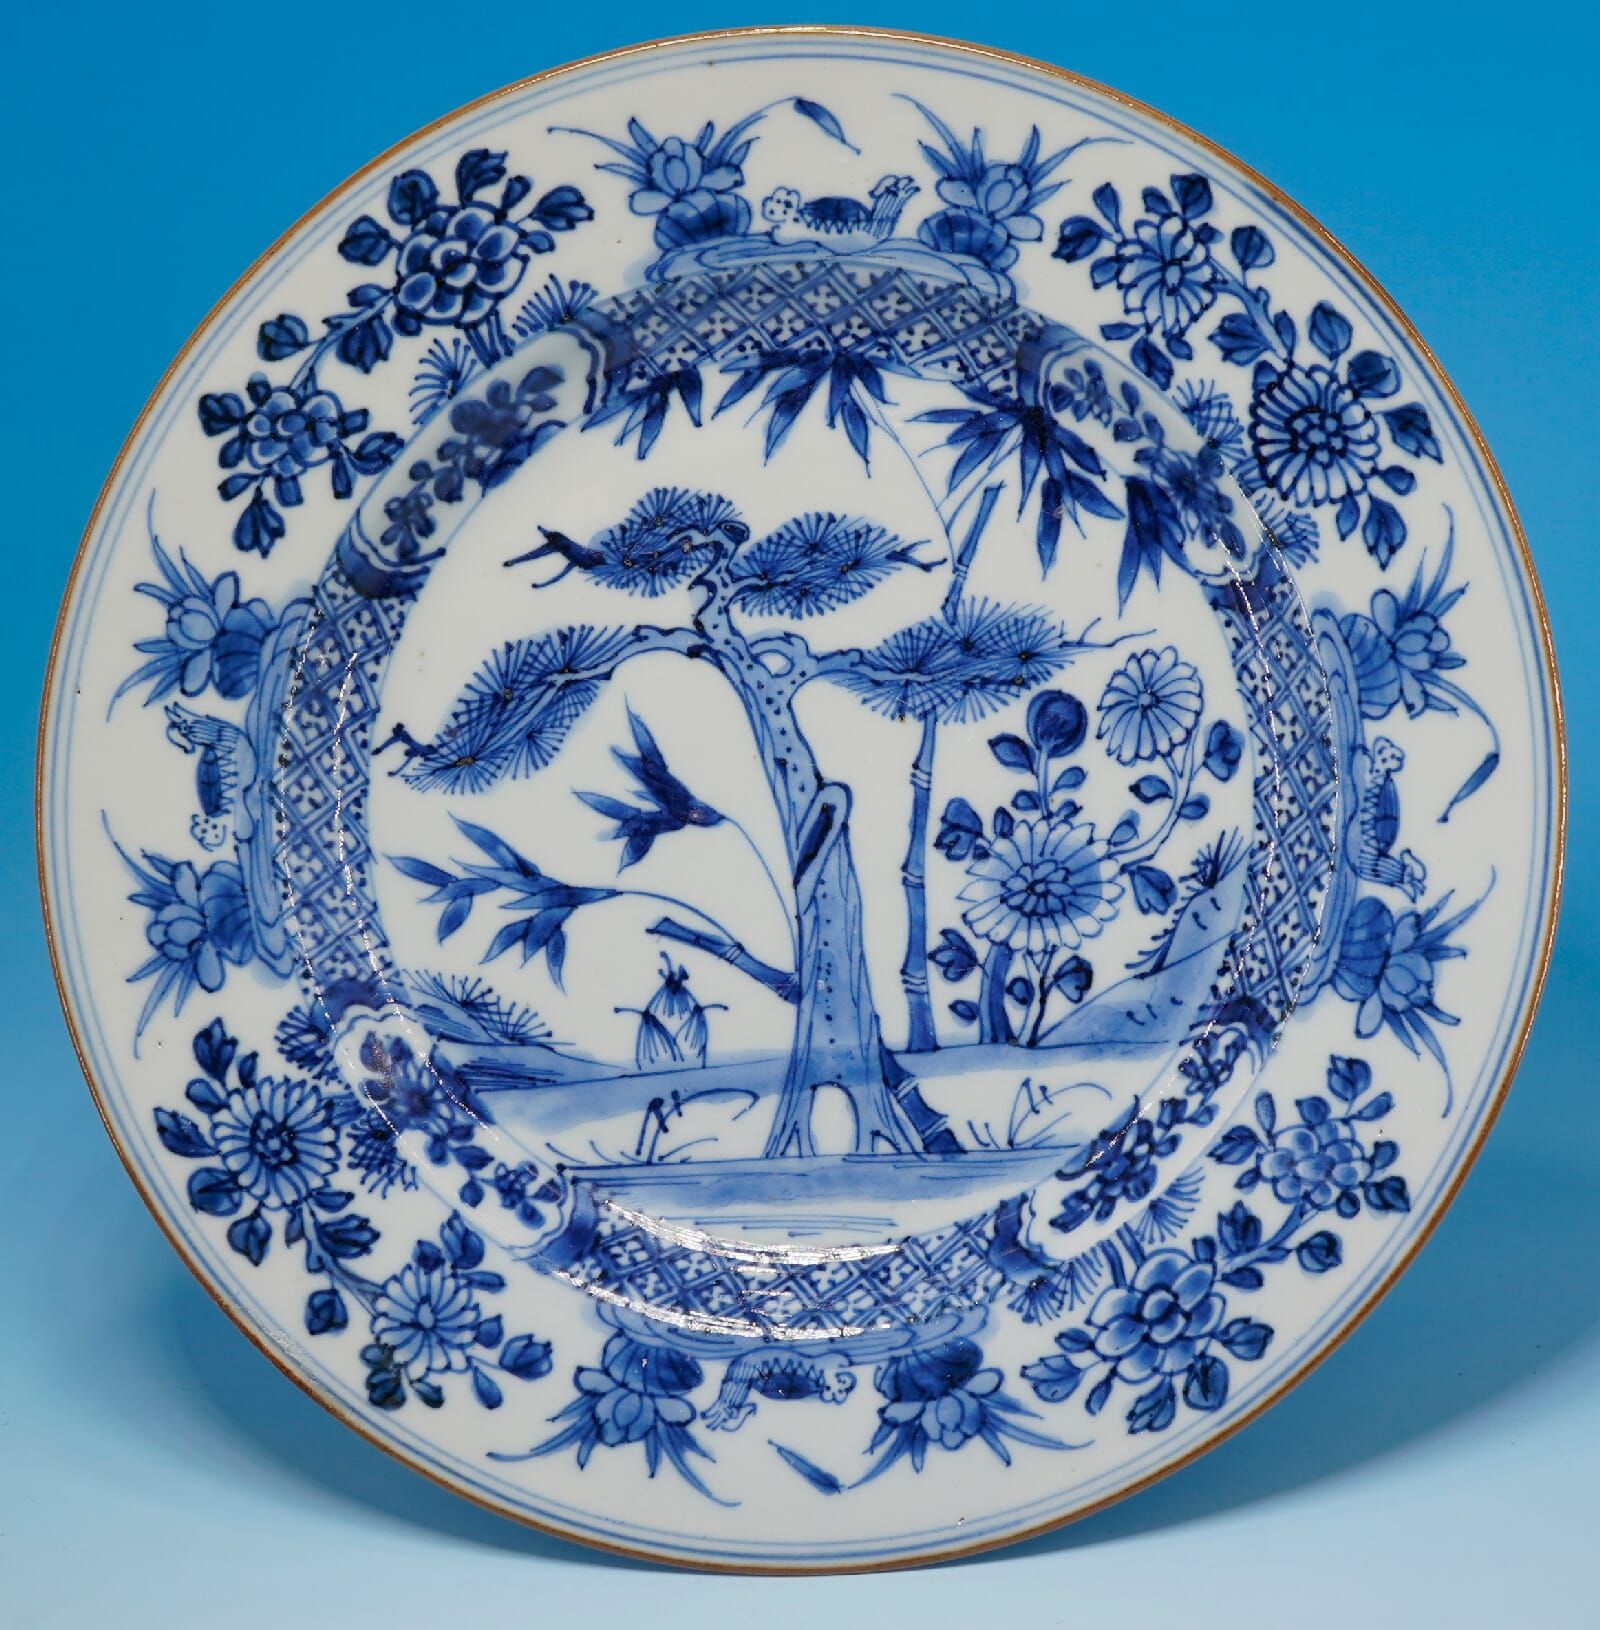 Chinese Export Plate, c.1750